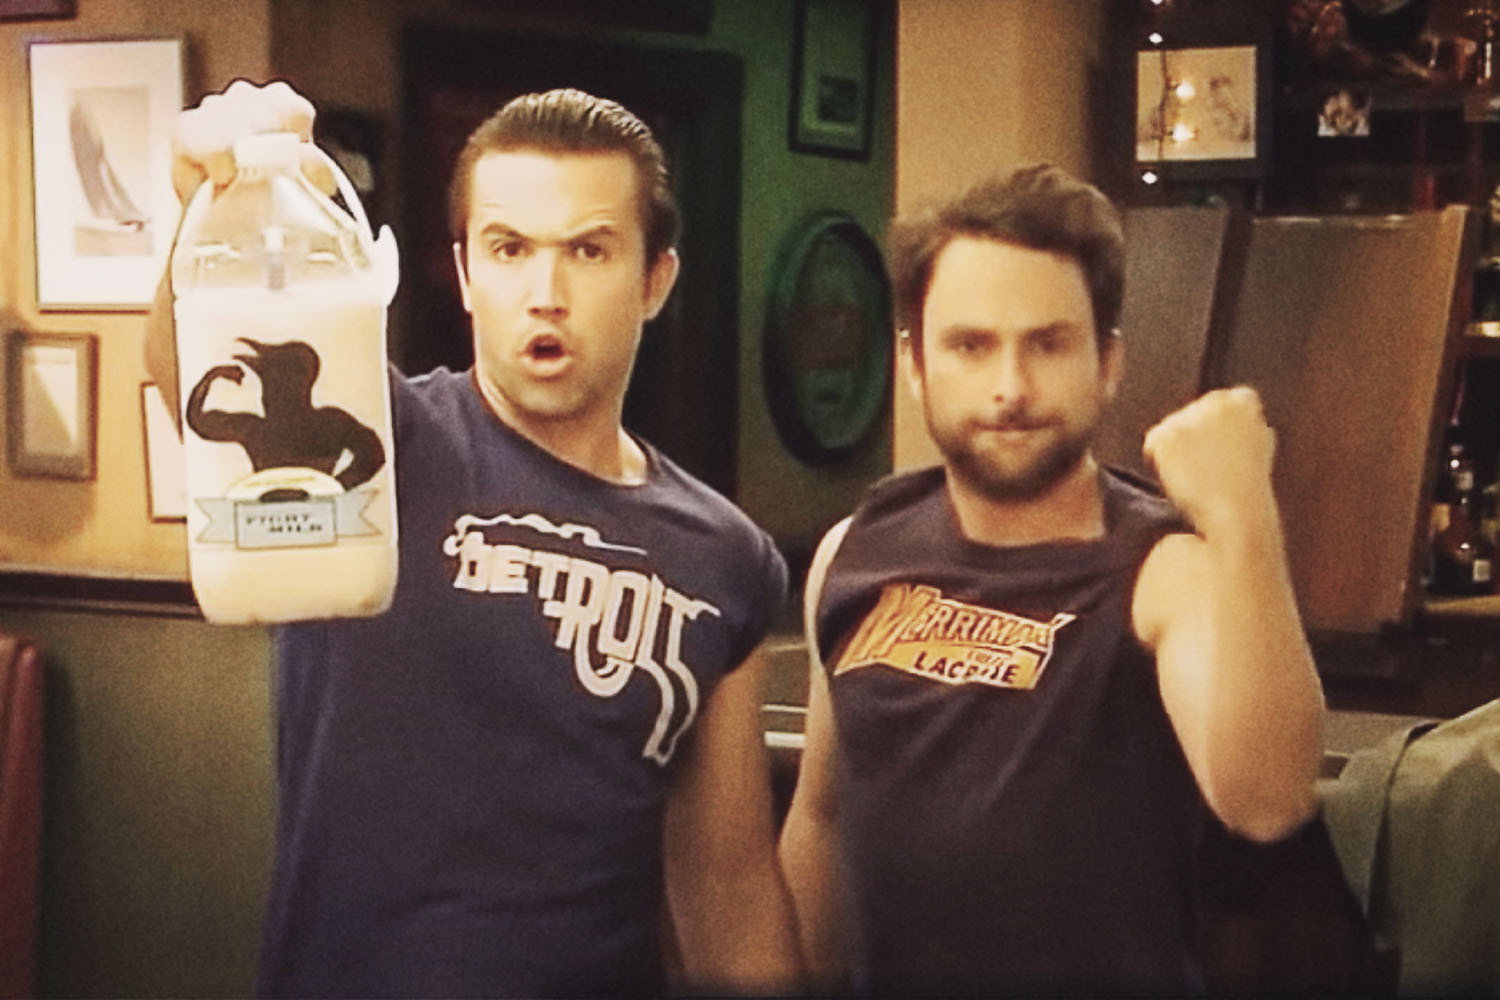 Mac and Charlie from "It's Always Sunny in Philadelphia" debuting their bodyguard drink Fight Milk